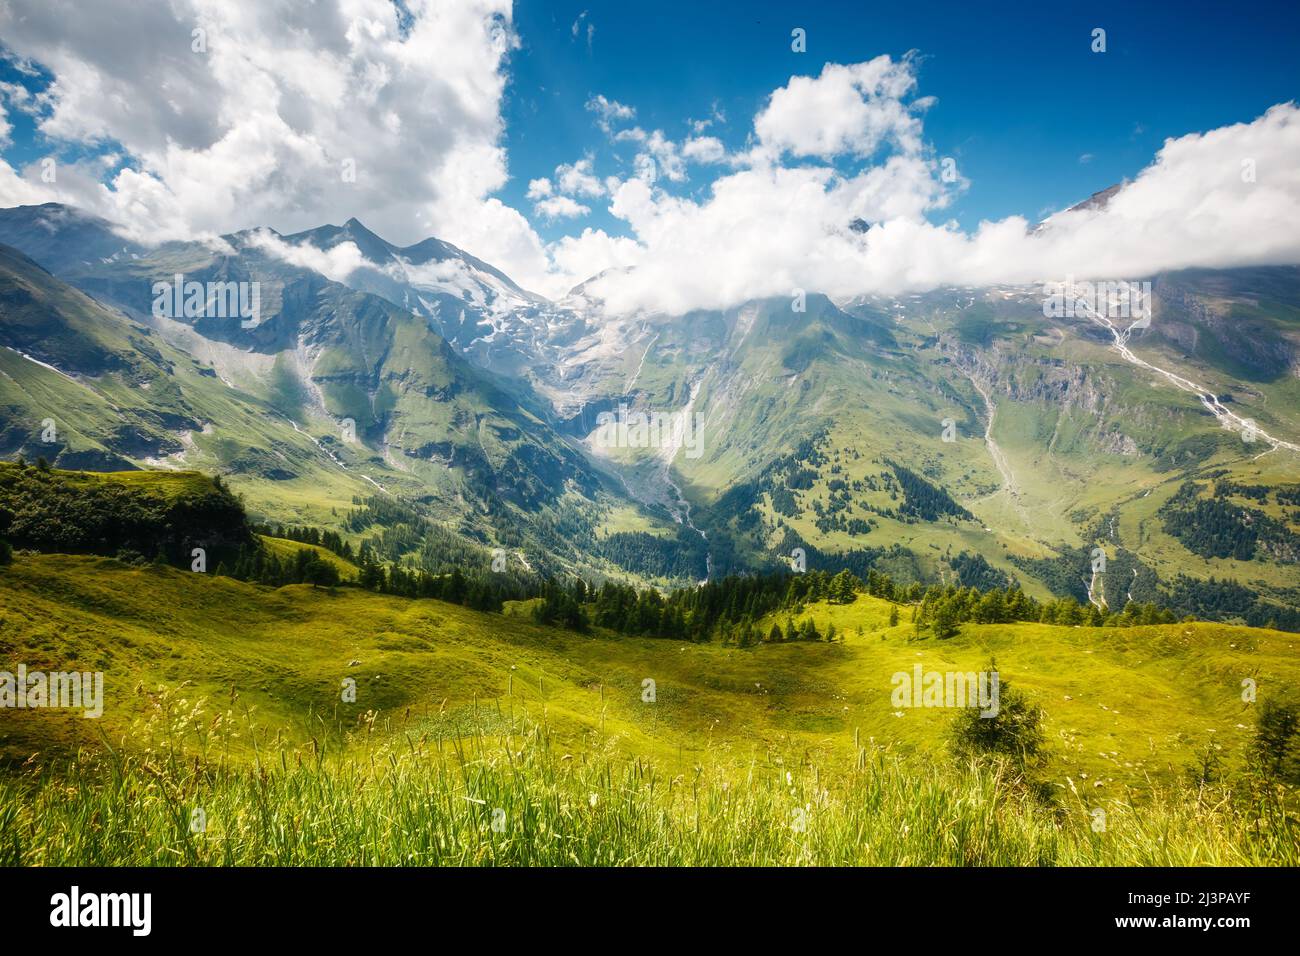 A great view of the green hills glowing by sunlight. Dramatic and picturesque morning scene. Location famous resort Grossglockner High Alpine Road, Au Stock Photo